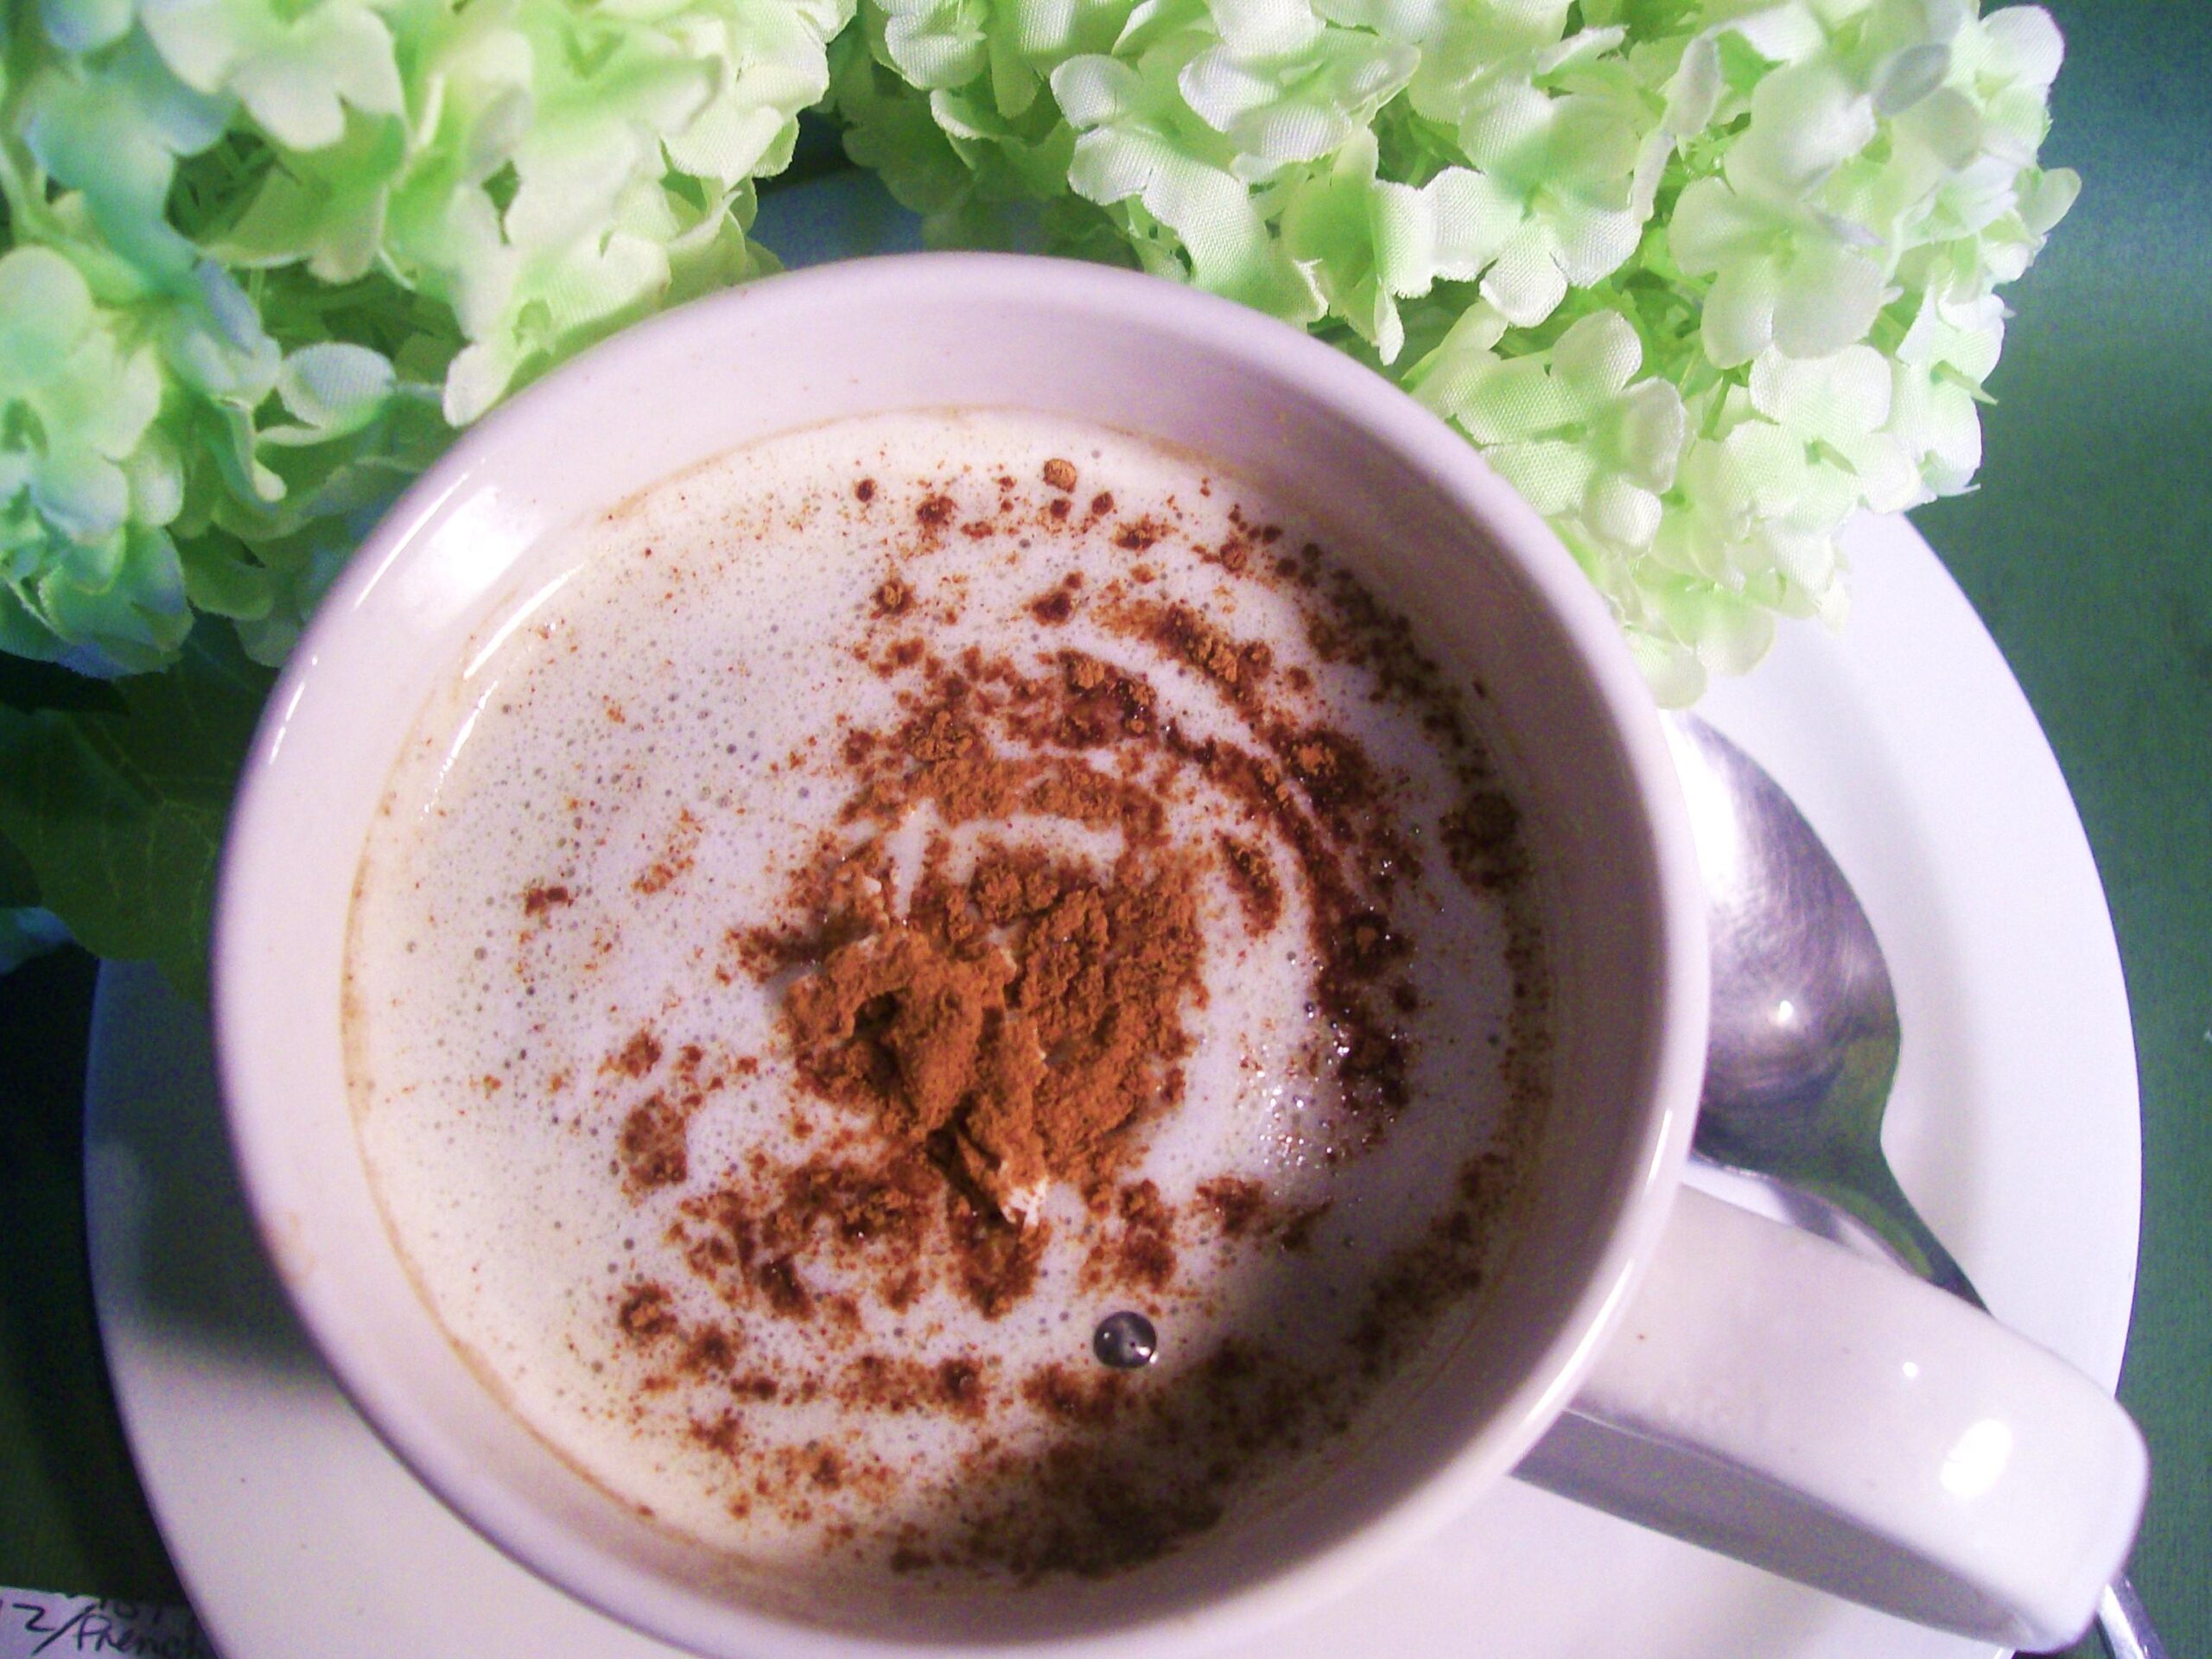  Our caramel cream coffee will satisfy your cravings for a sweet treat and a caffeine boost.